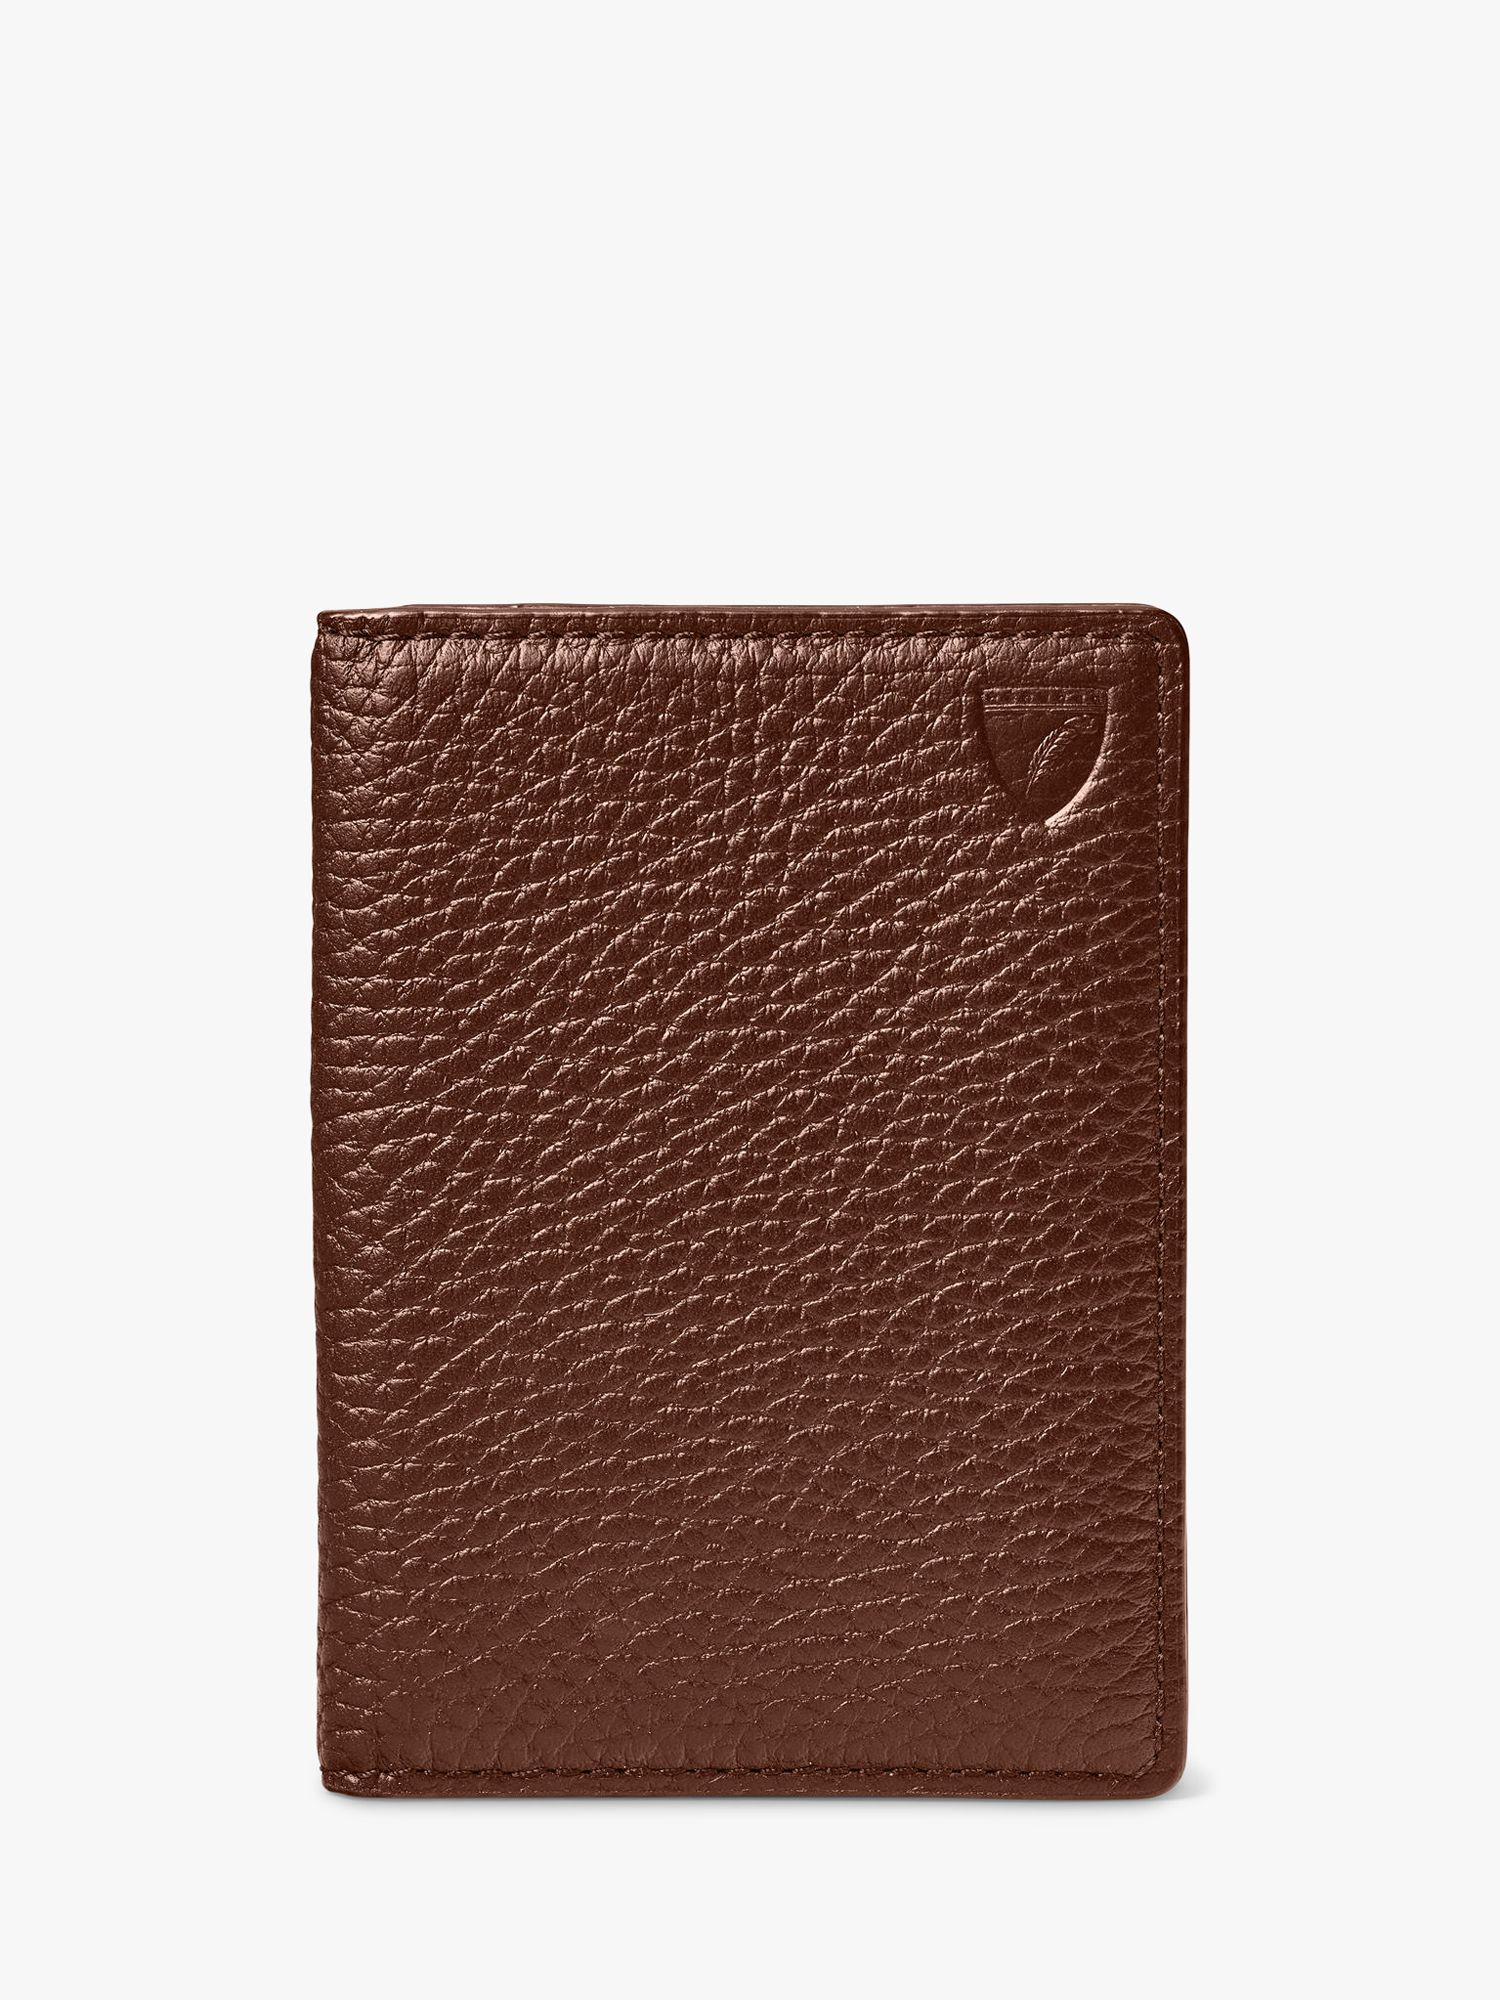 Aspinal of London Double Fold Pebble Leather Card Holder, Tobacco